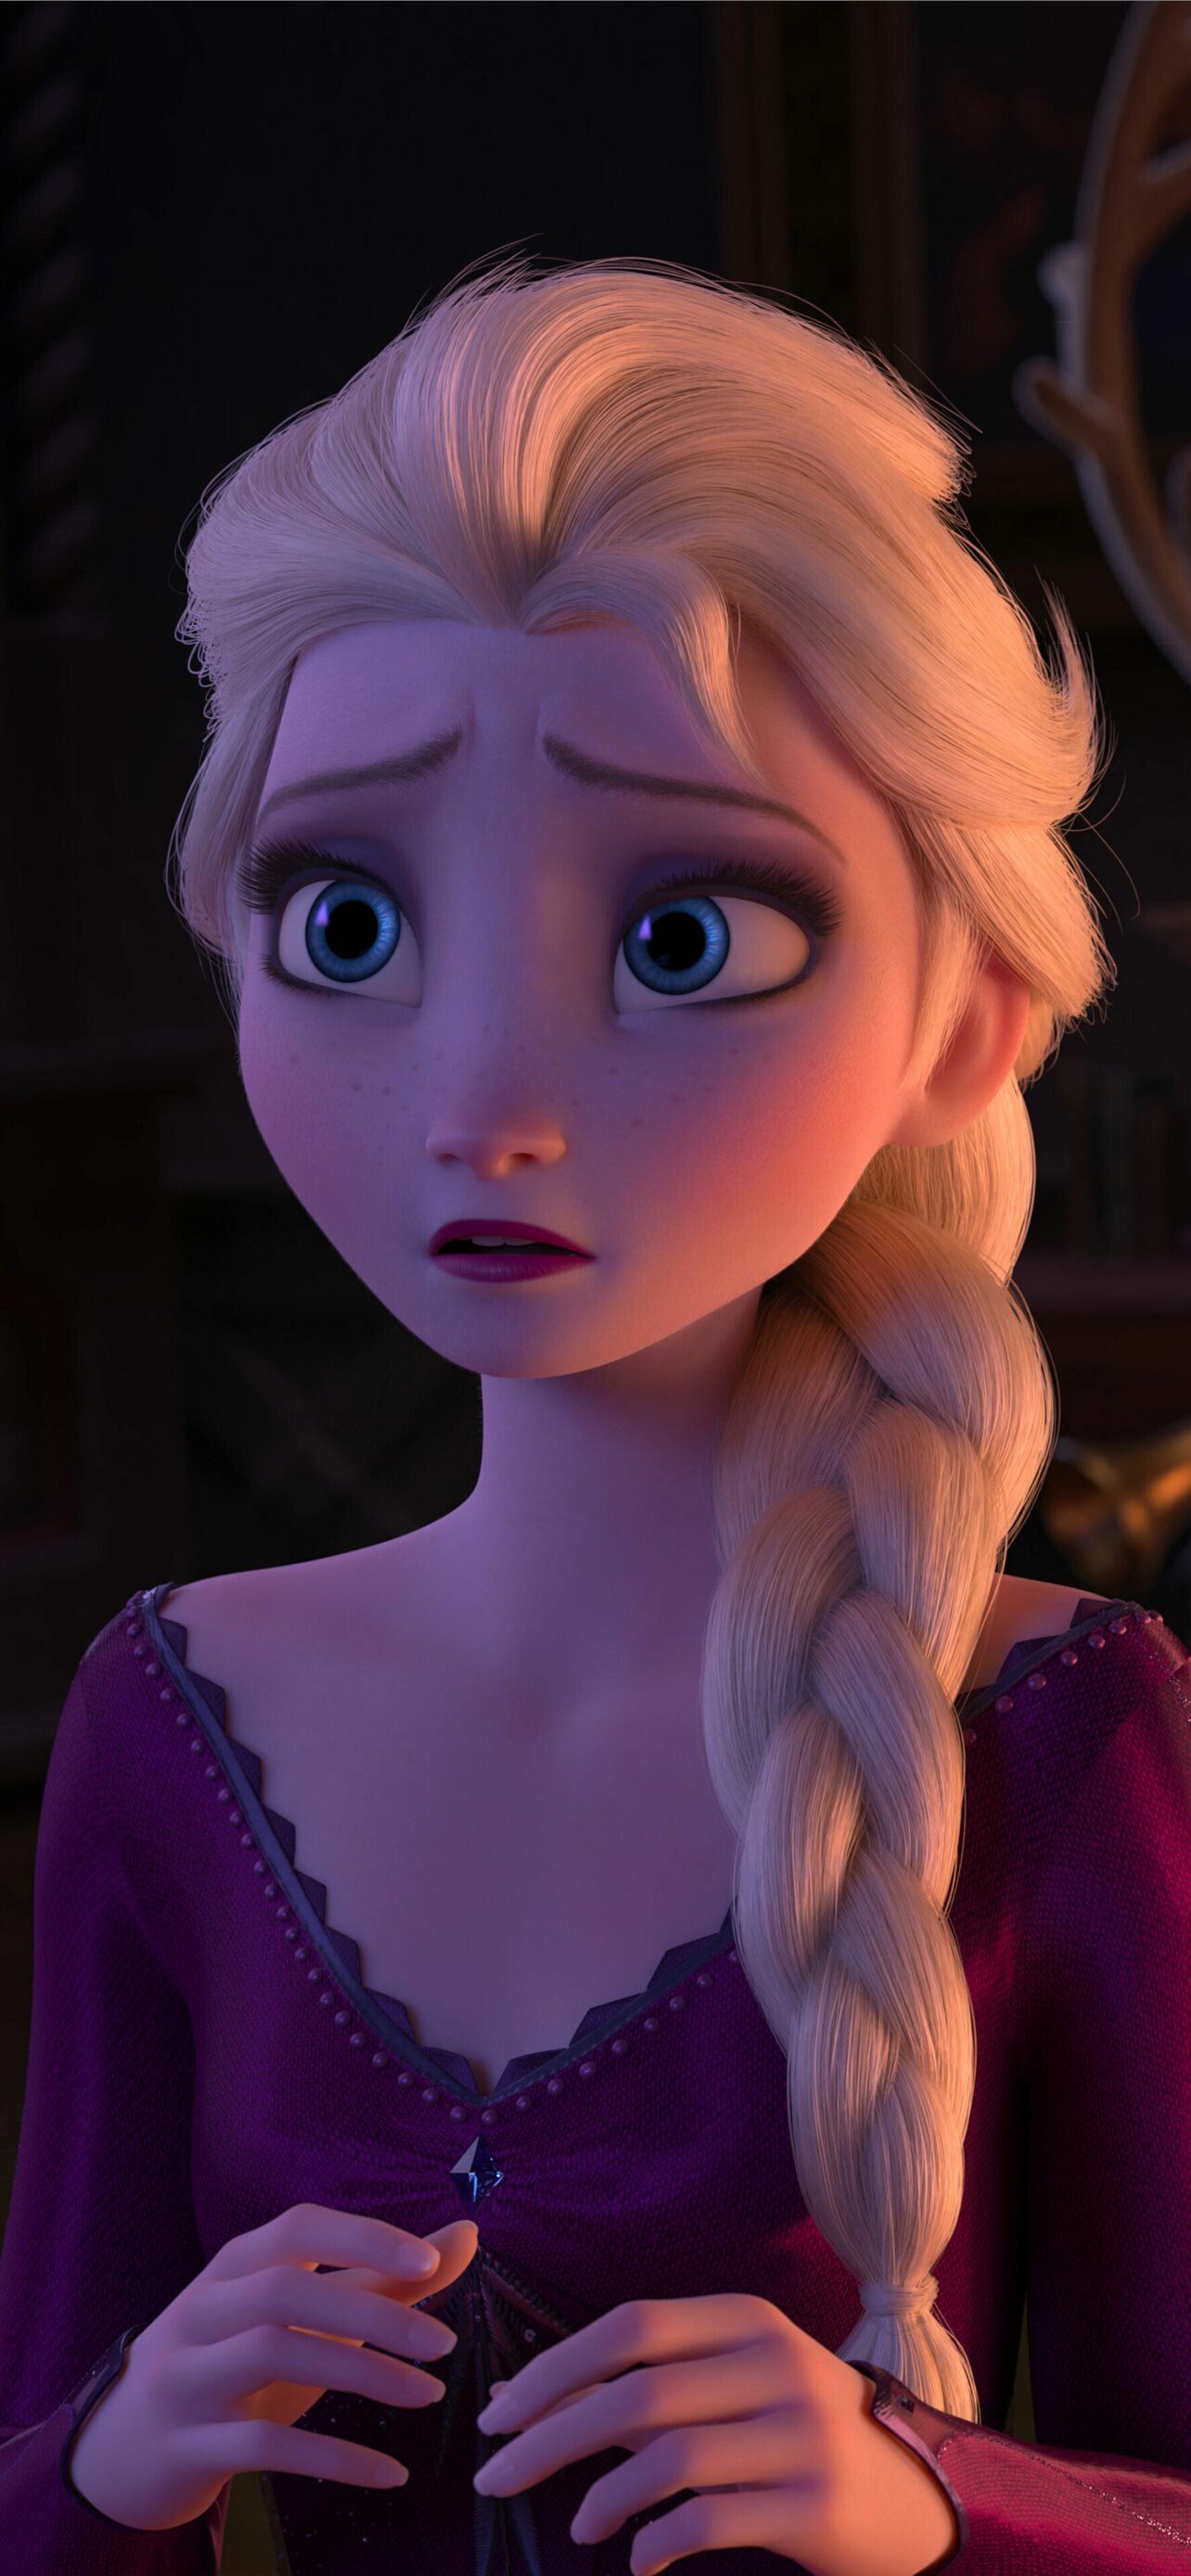 Frozen: Elsa's supervising animator was Wayne Unten, who asked for that role because he was fascinated by her complexity. 1290x2780 HD Wallpaper.